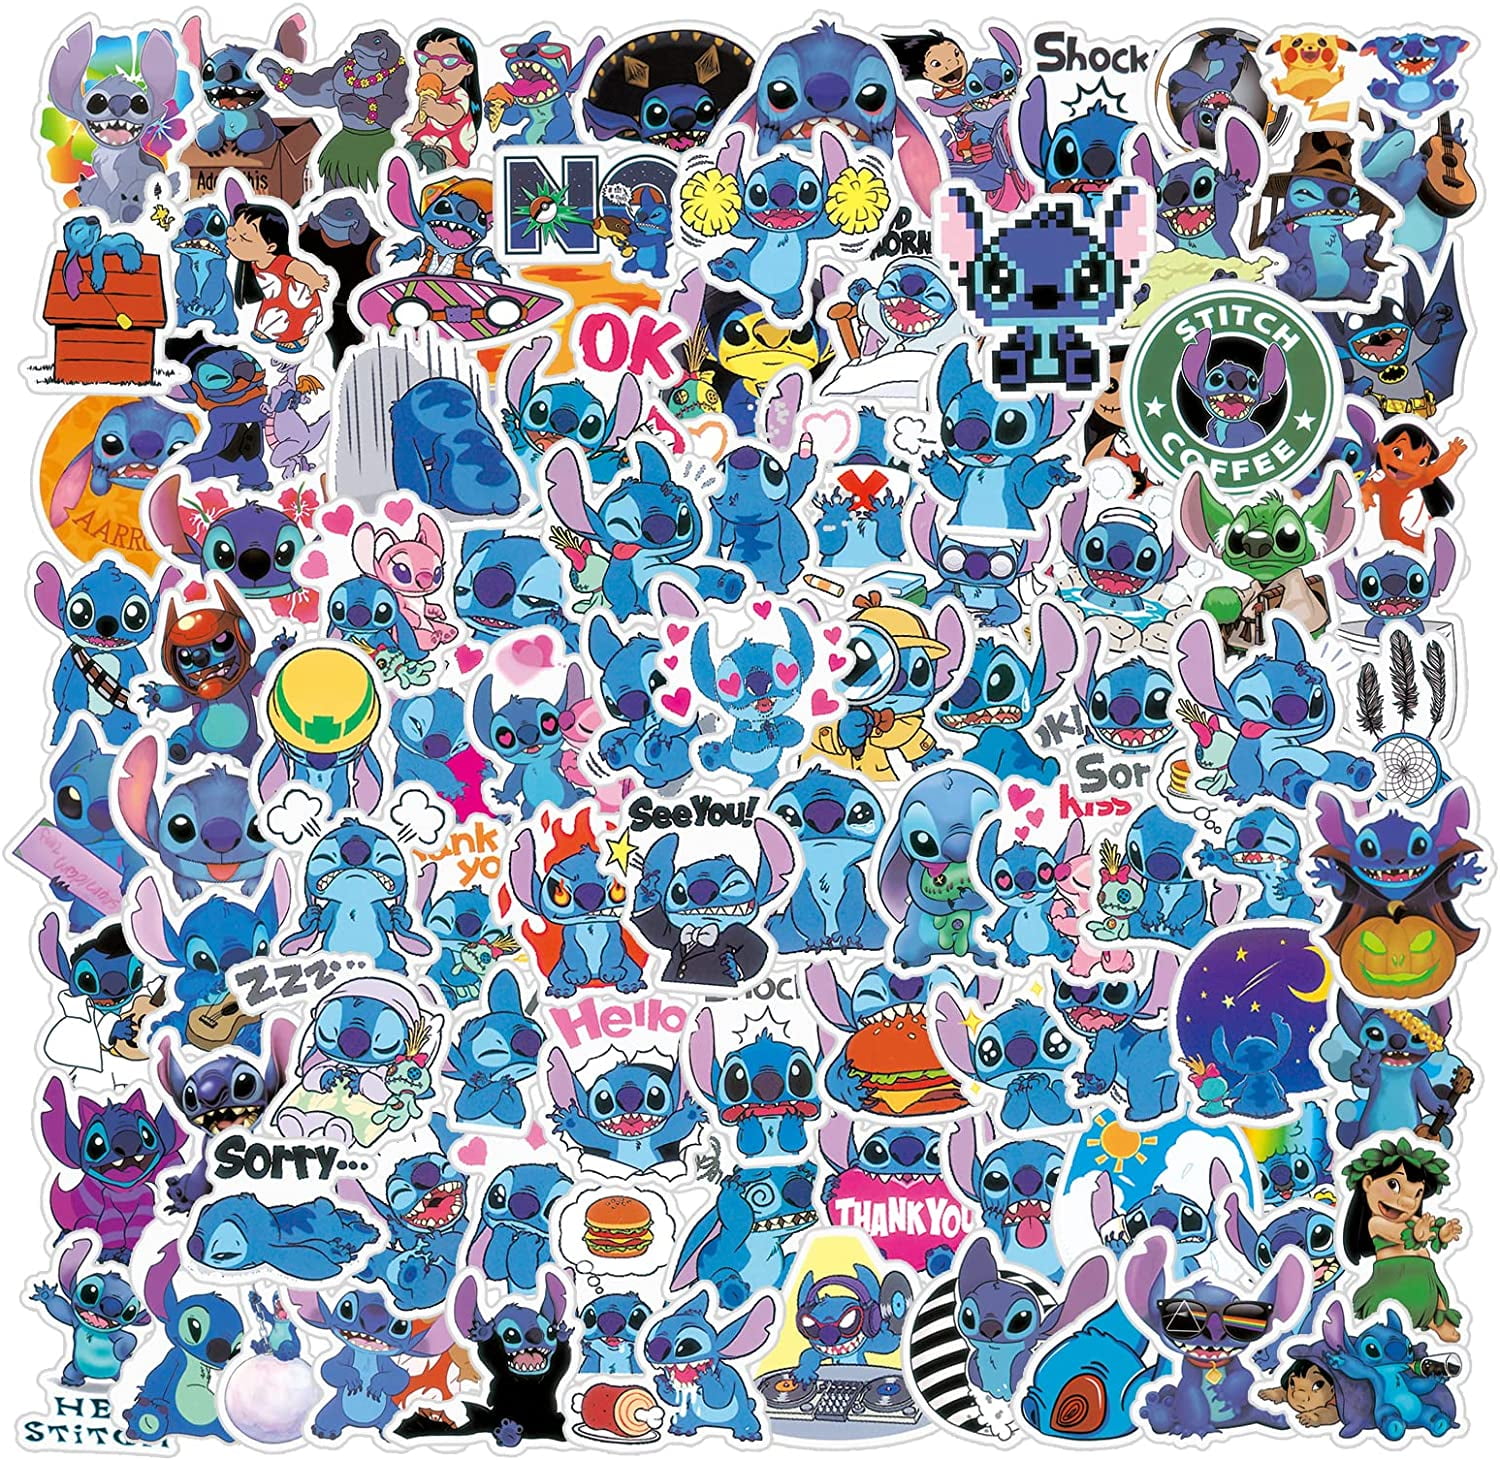  50Pcs Stitch Stickers, Cute Lilo & Stitch Vinyl Sticker for  Water Bottle, Laptop,Bumper,Helmet,Skaterboard, Funny Stitch Durable  Stickers and Decals for Kids Teens Gifts : Electronics